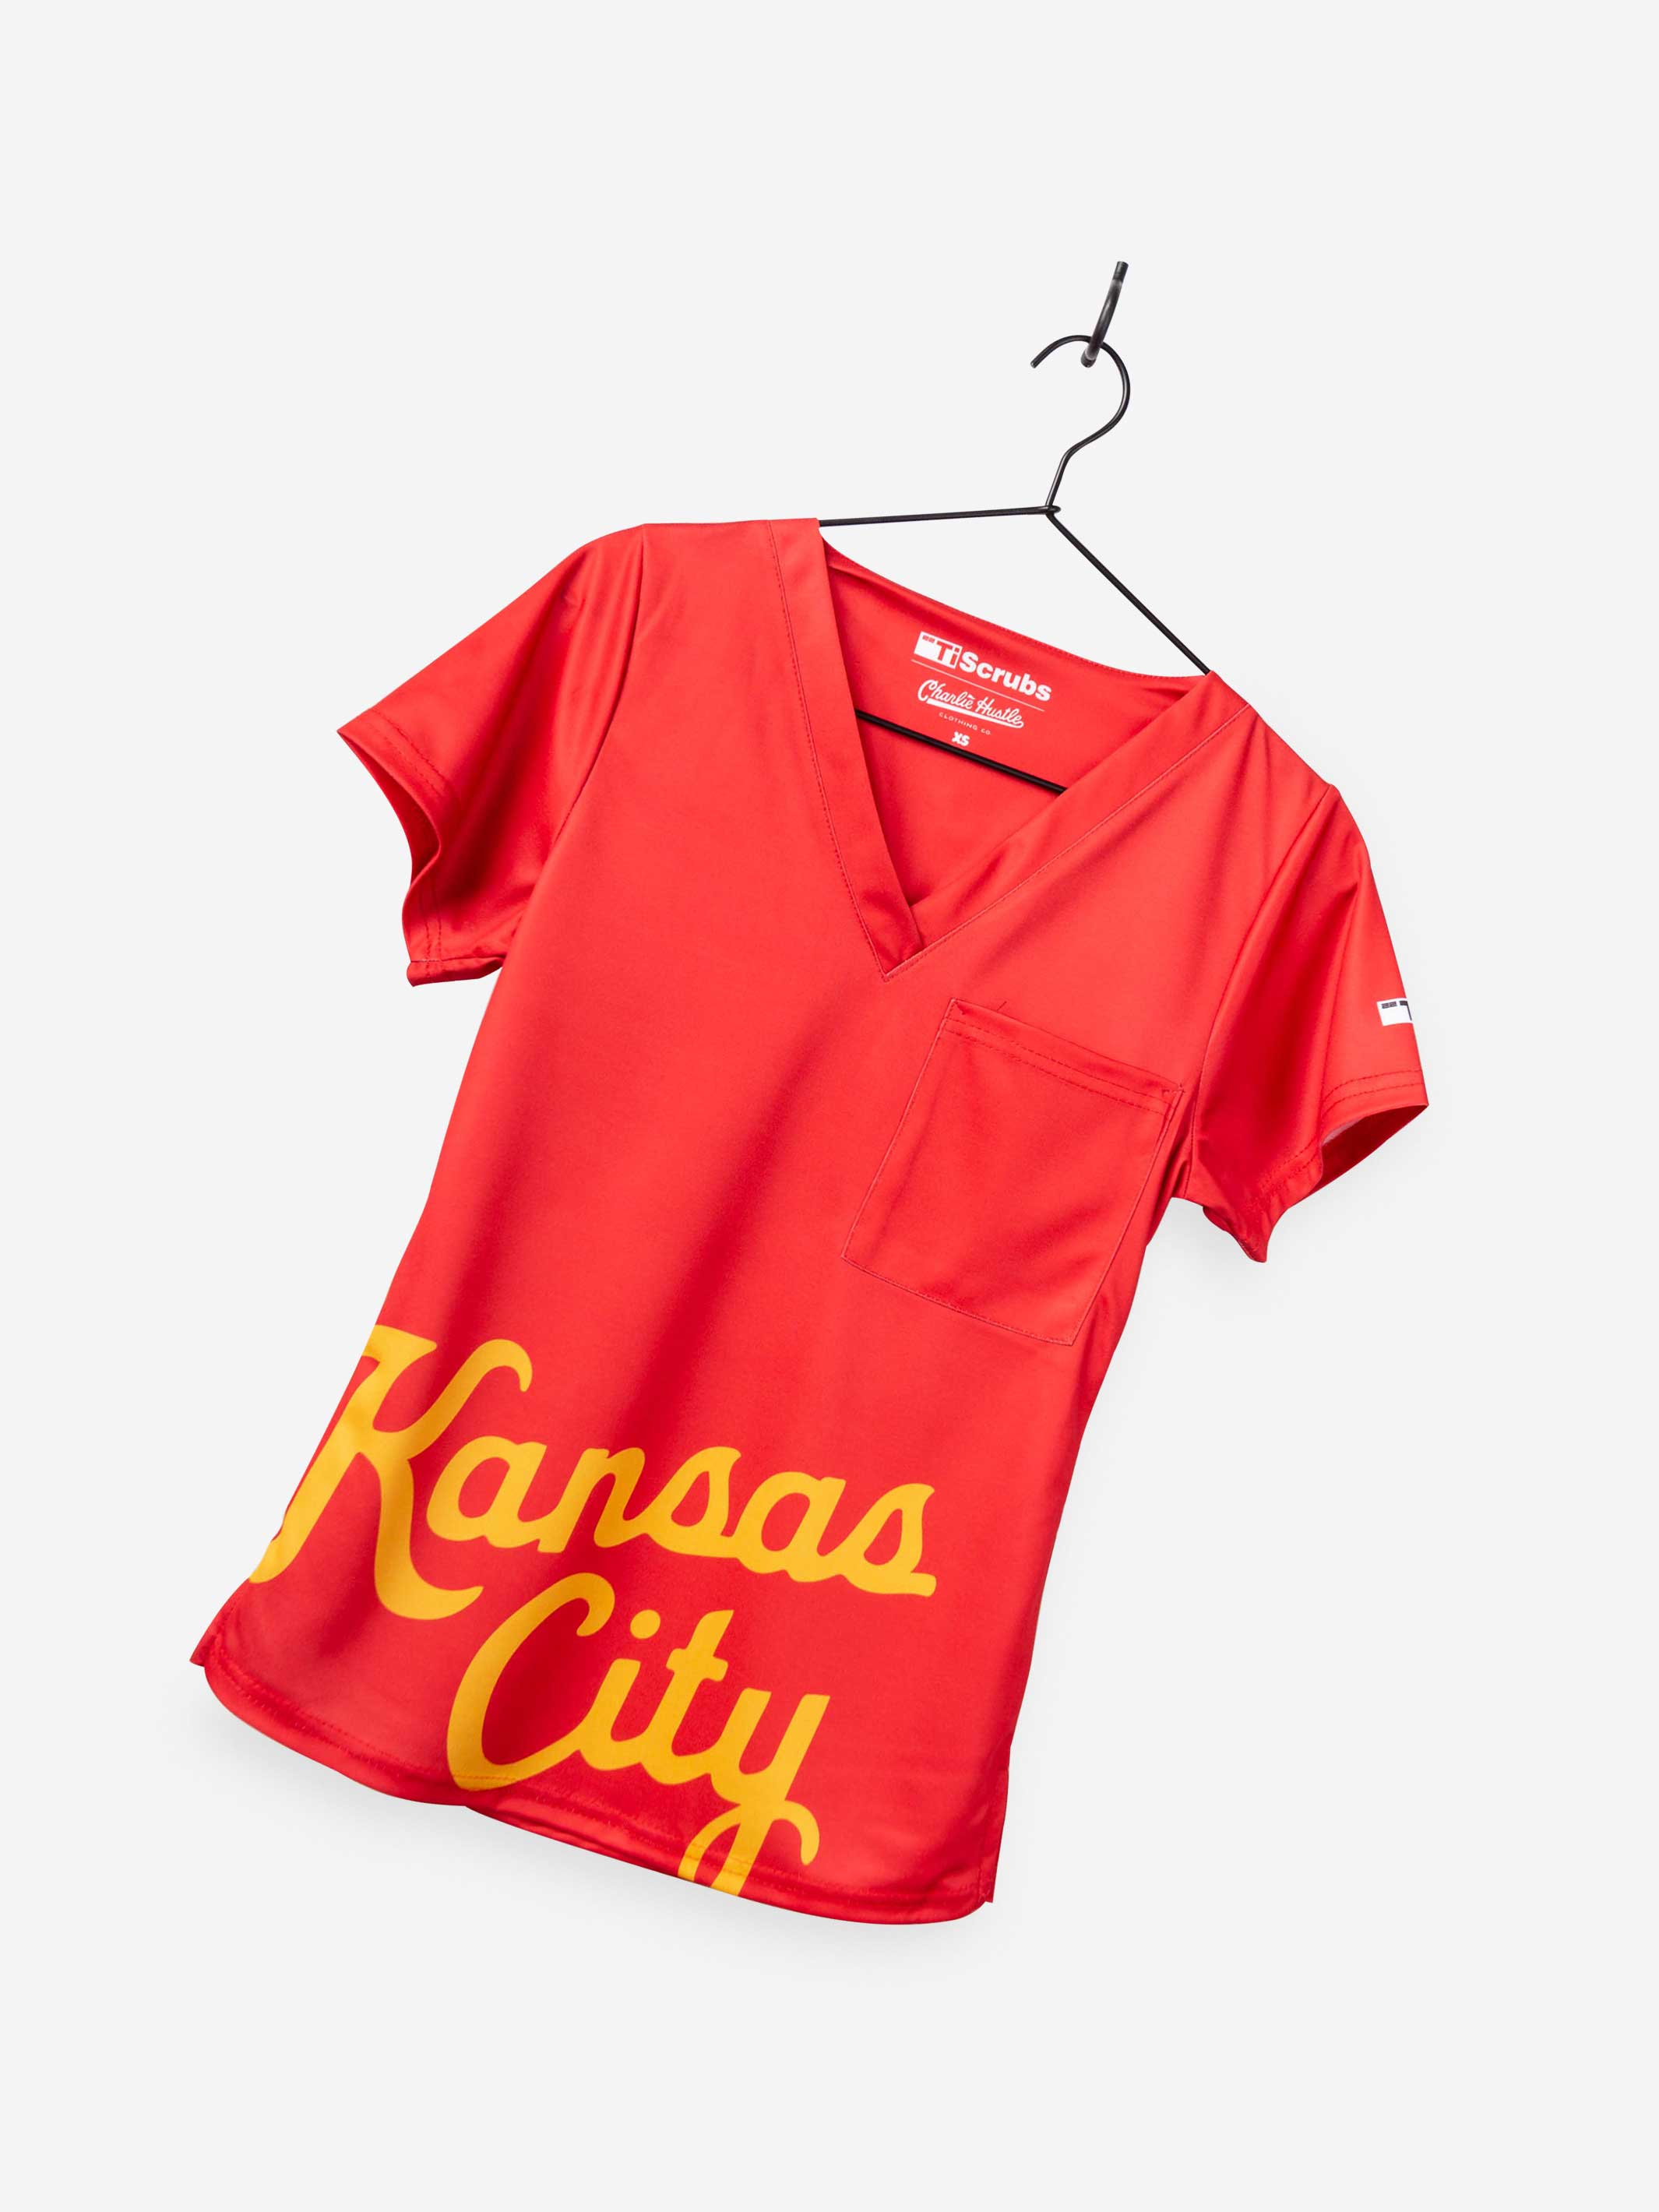 Women's Charlie Hustle Scrub Top with Kansas City Script in Red and Gold with V-neck